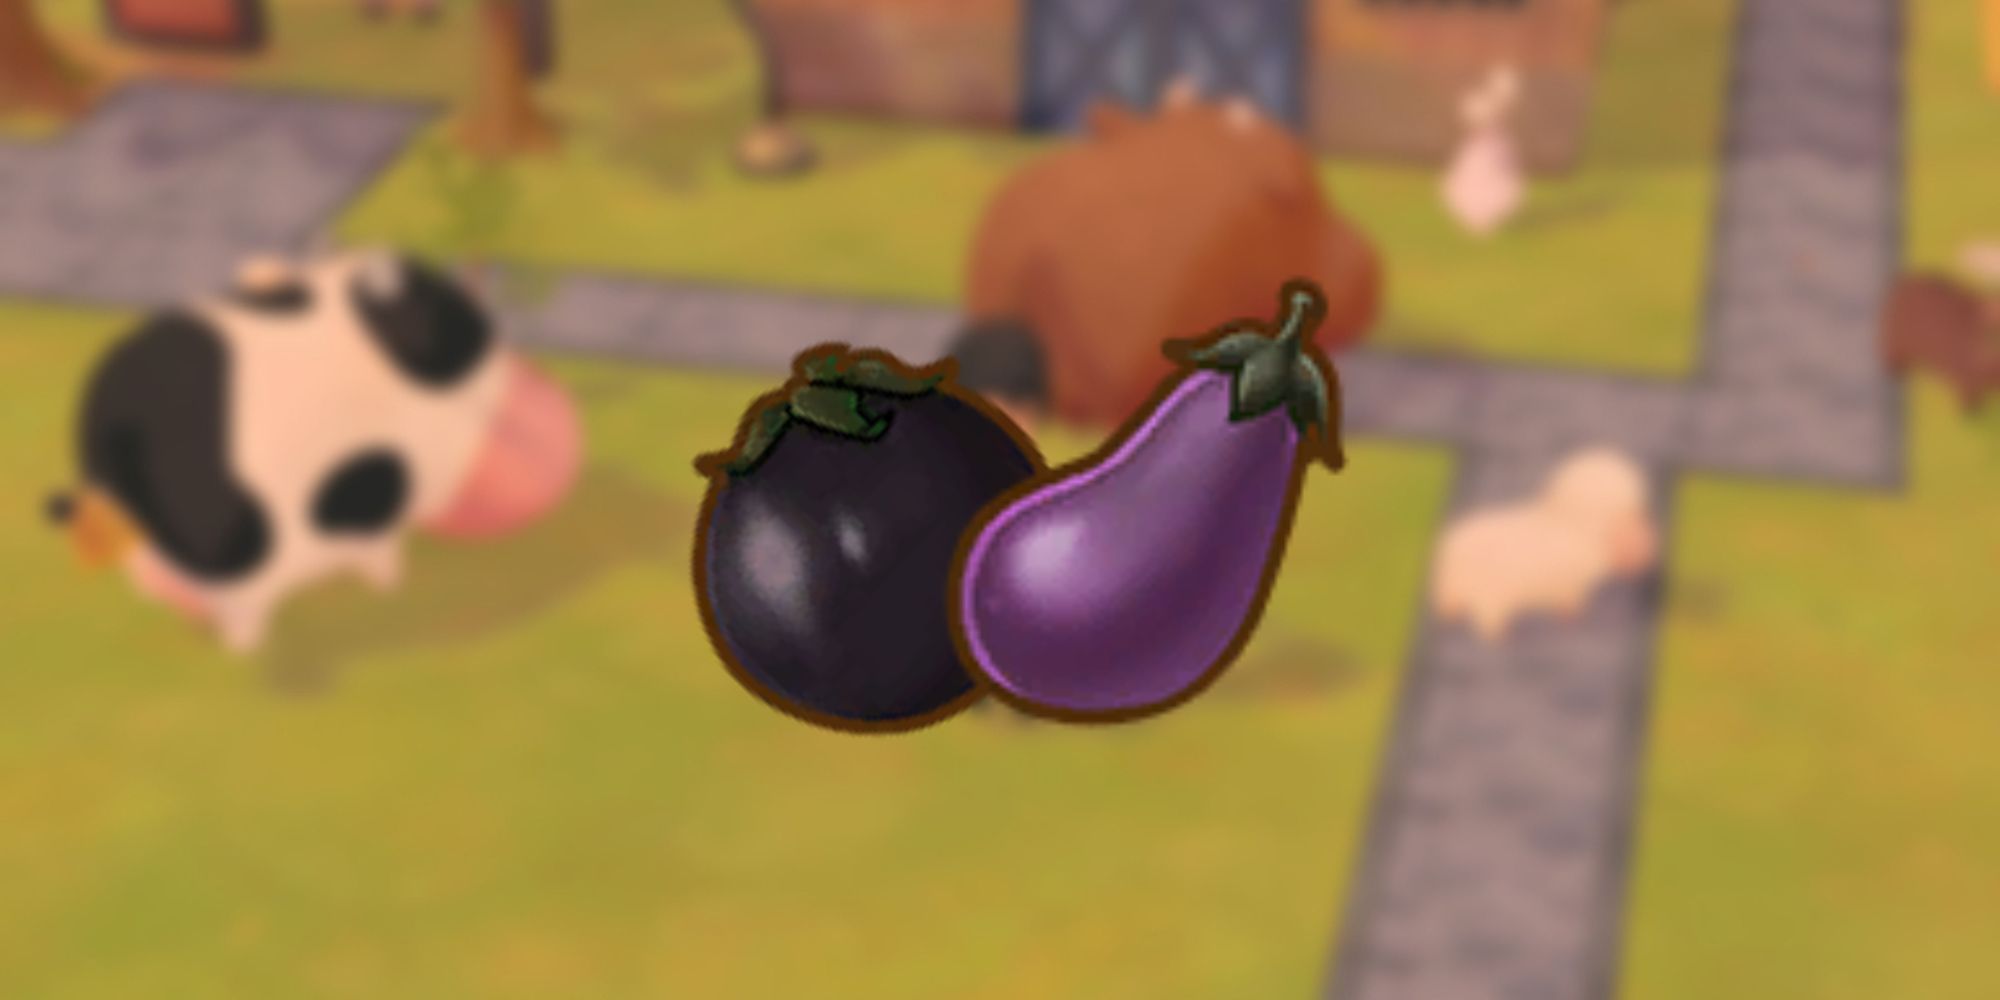 Eggplant and Round Eggplant icon as it would be seen in players inventory over blurred background of player and cows in game